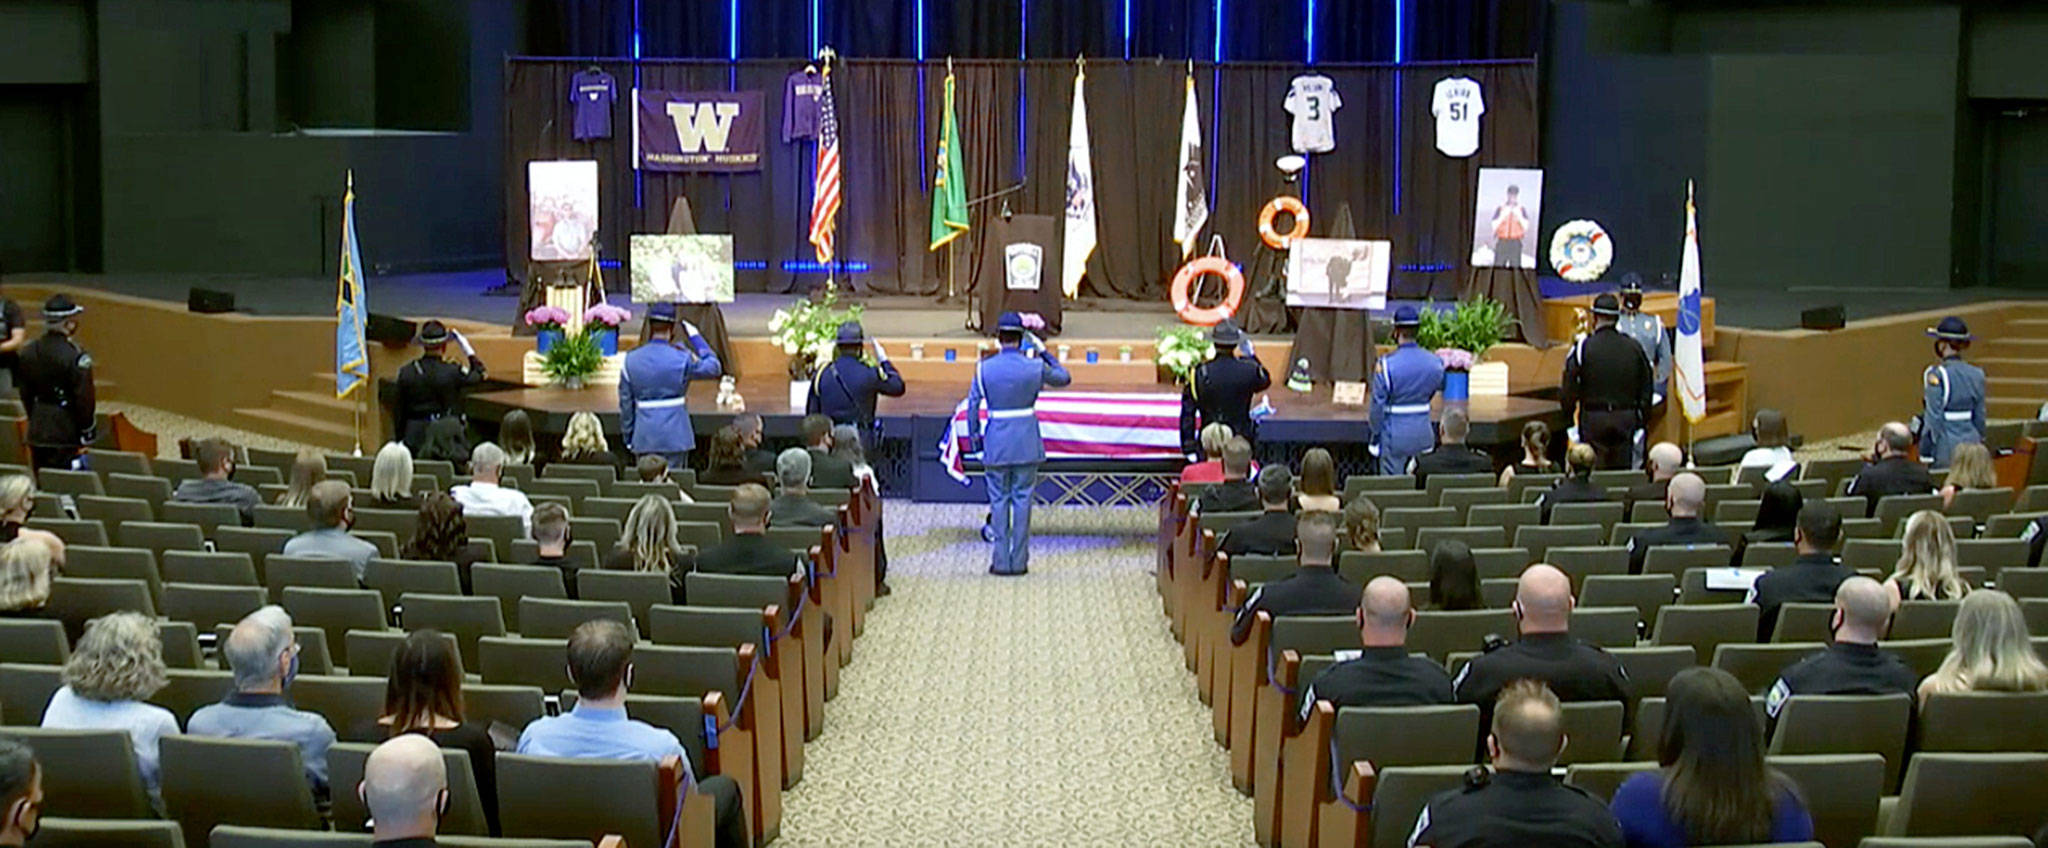 The memorial service for Bothell police officer Jonathan Shoop on Tuesday.